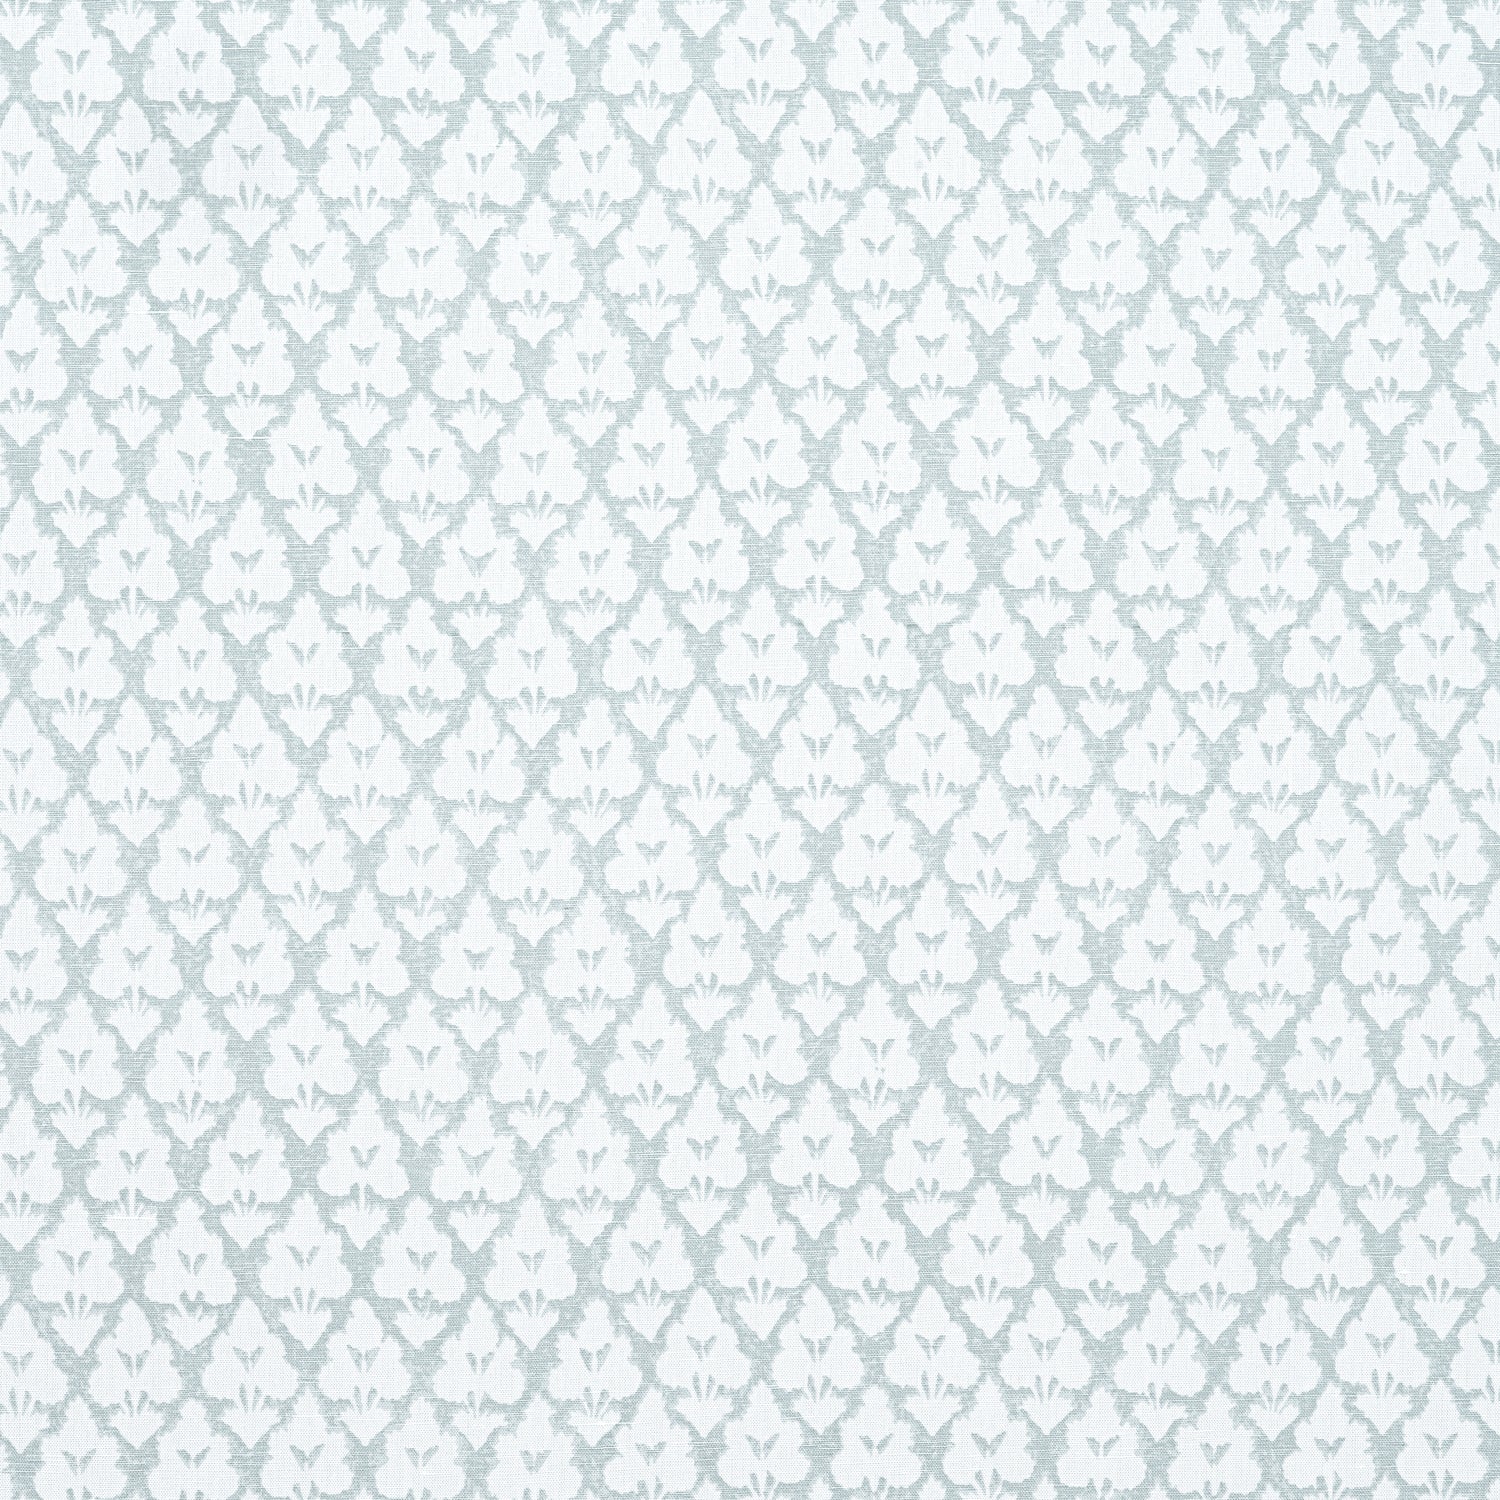 Arboreta fabric in spa blue color - pattern number F910832 - by Thibaut in the Heritage collection